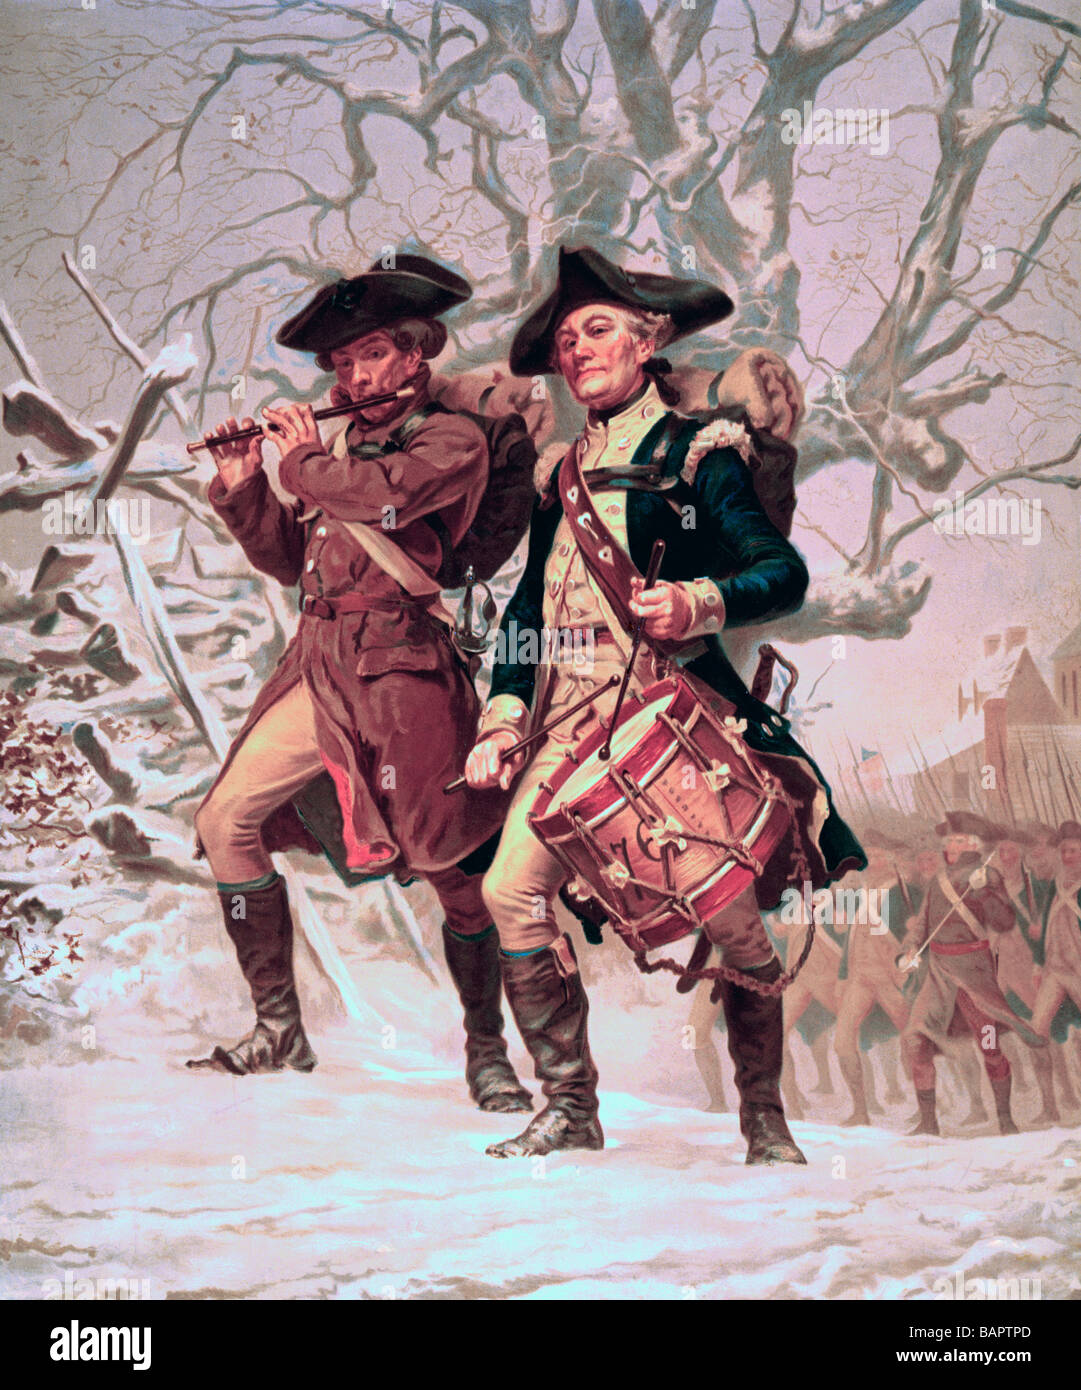 The Continentals - Two soldiers of the Continental Army color guard, playing fife and drum, marching in winter. Stock Photo